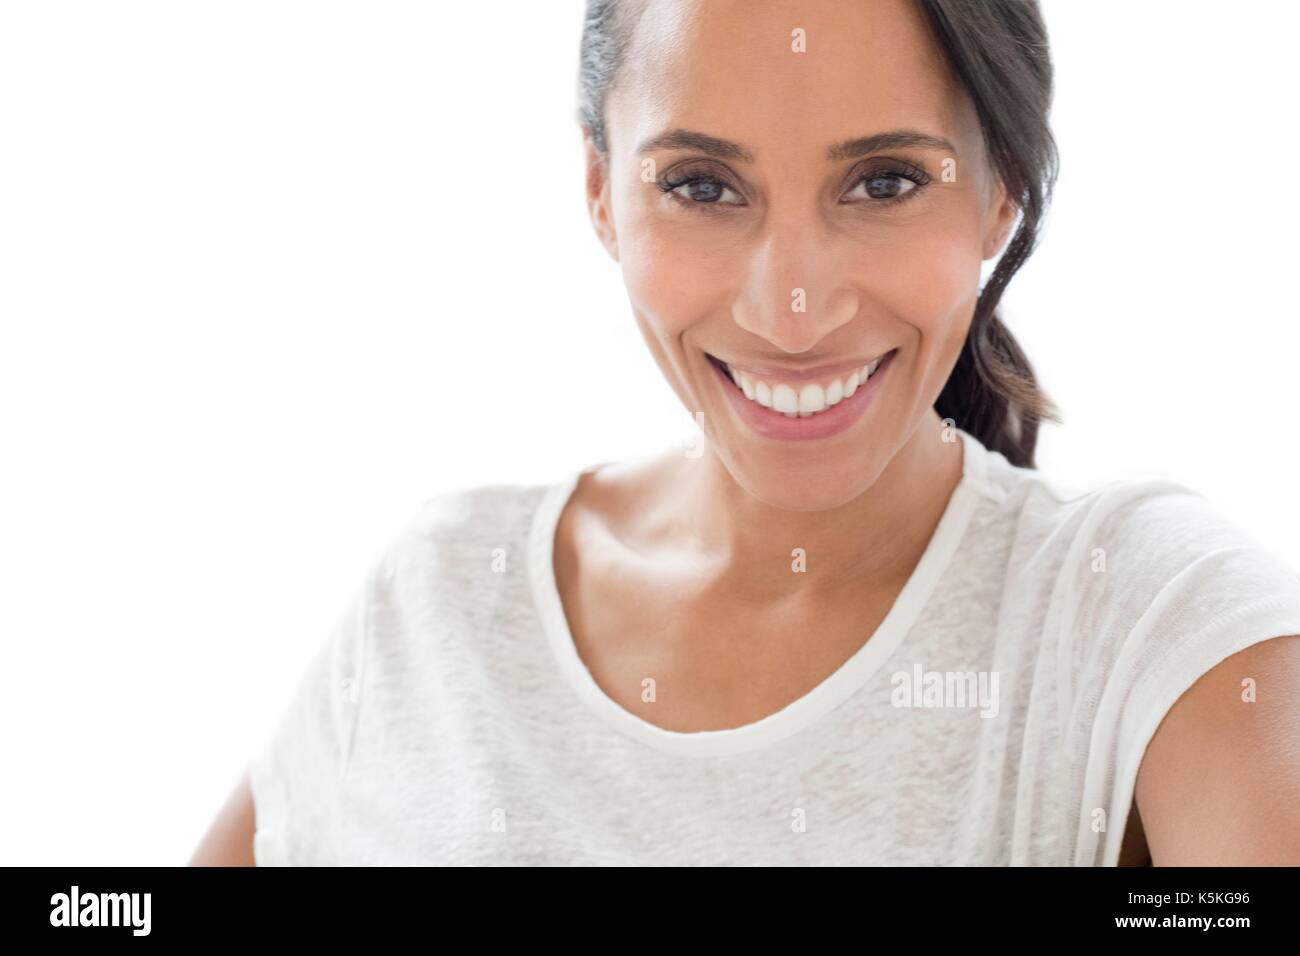 Mid adult woman smiling towards camera, portrait. Stock Photo